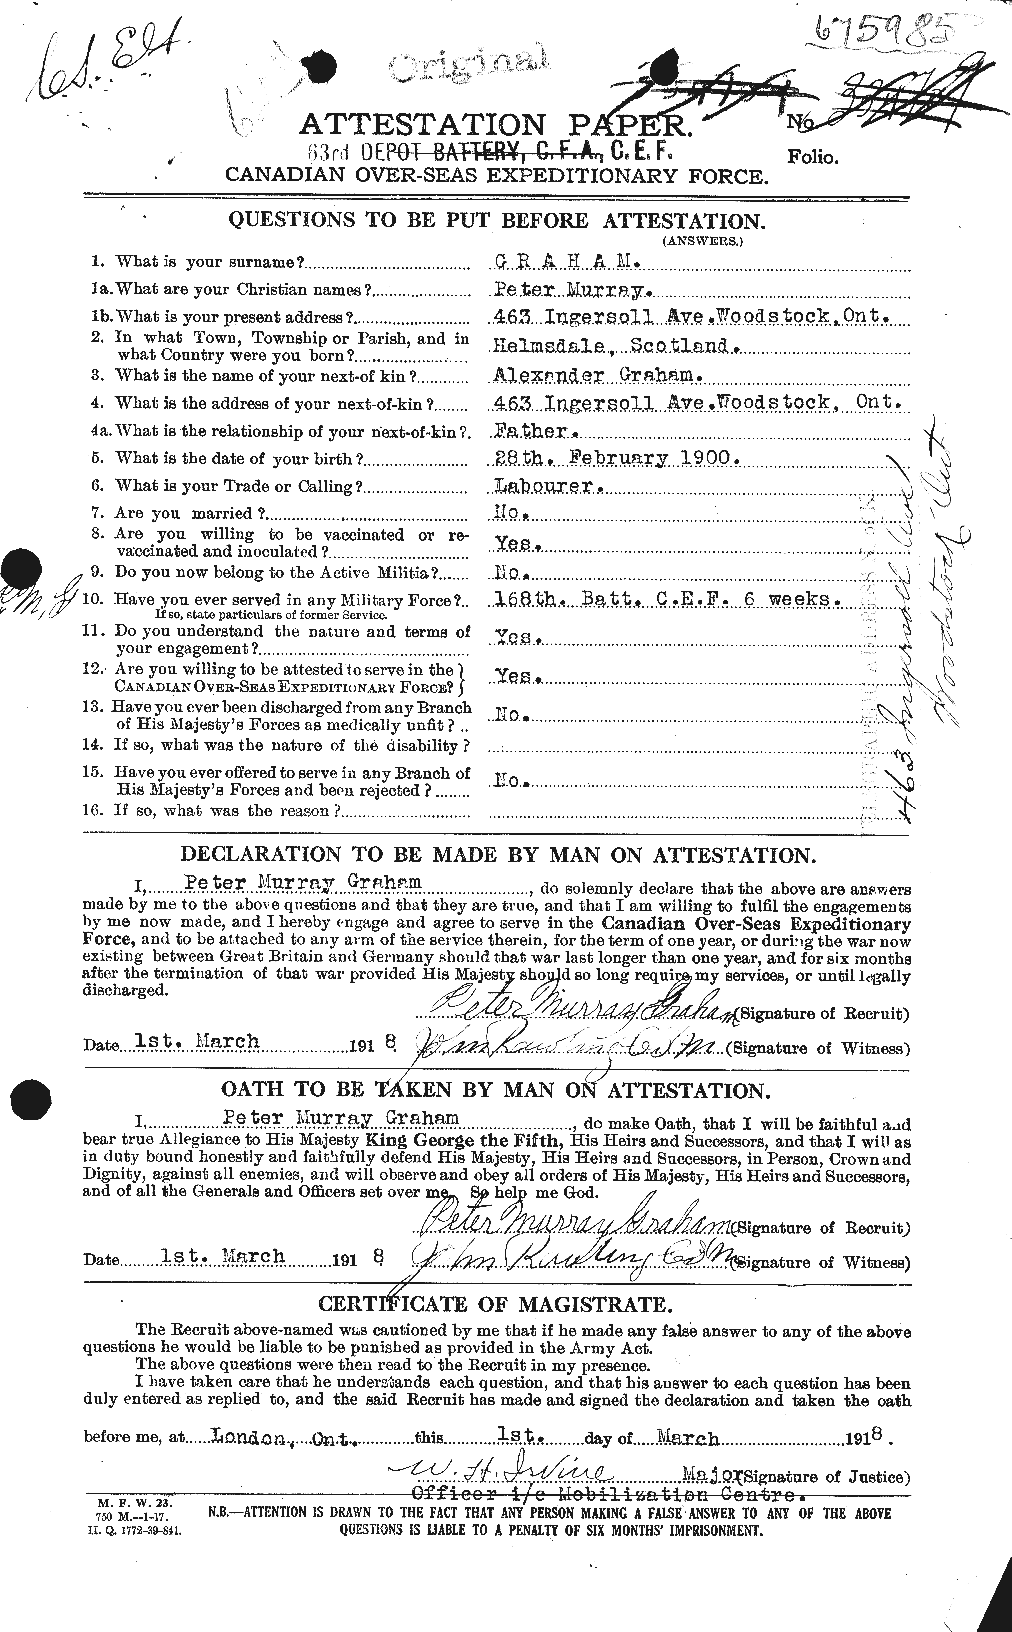 Personnel Records of the First World War - CEF 359350a